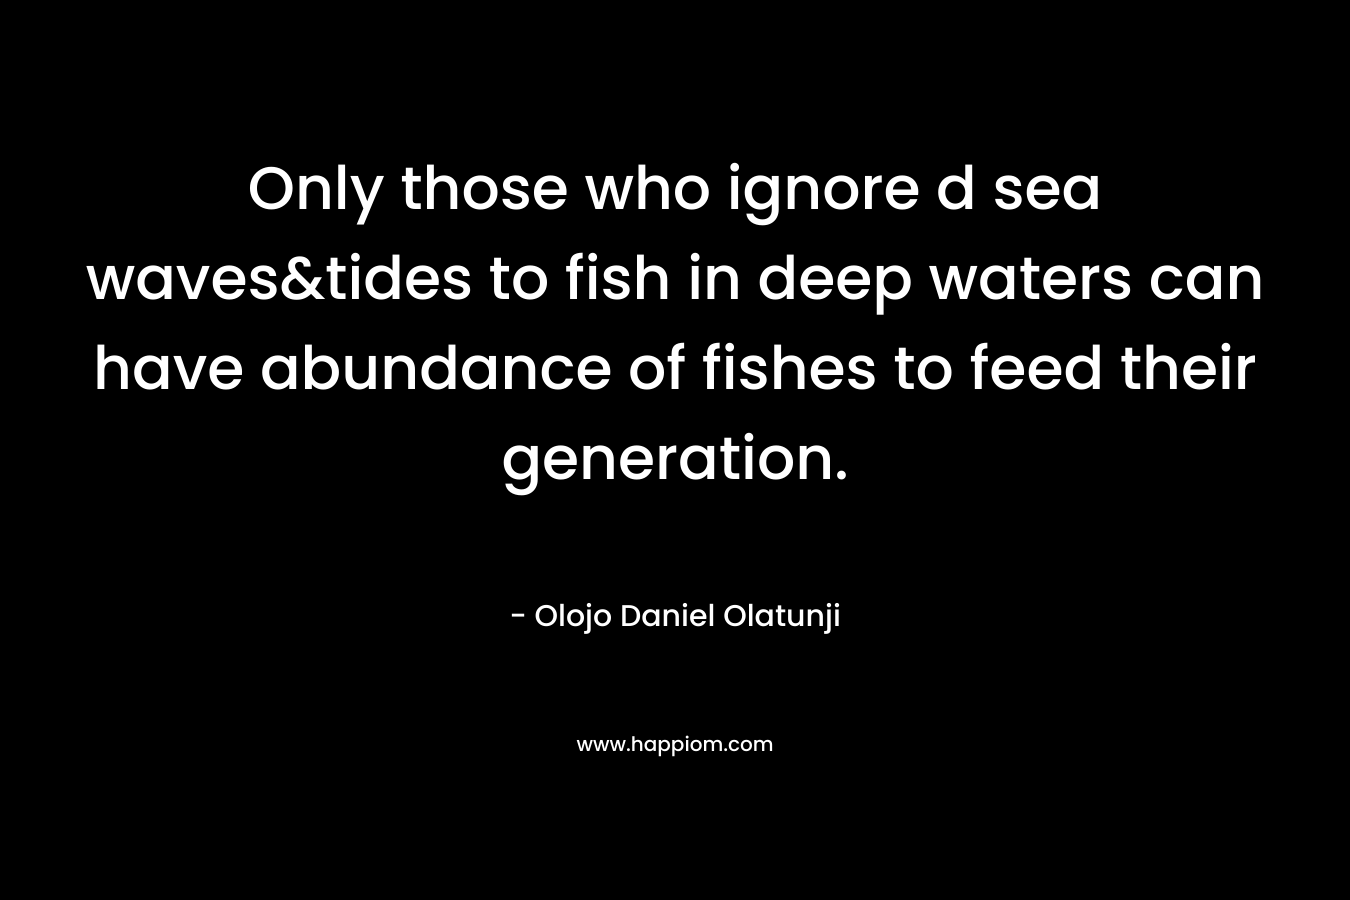 Only those who ignore d sea waves&tides to fish in deep waters can have abundance of fishes to feed their generation. – Olojo Daniel Olatunji